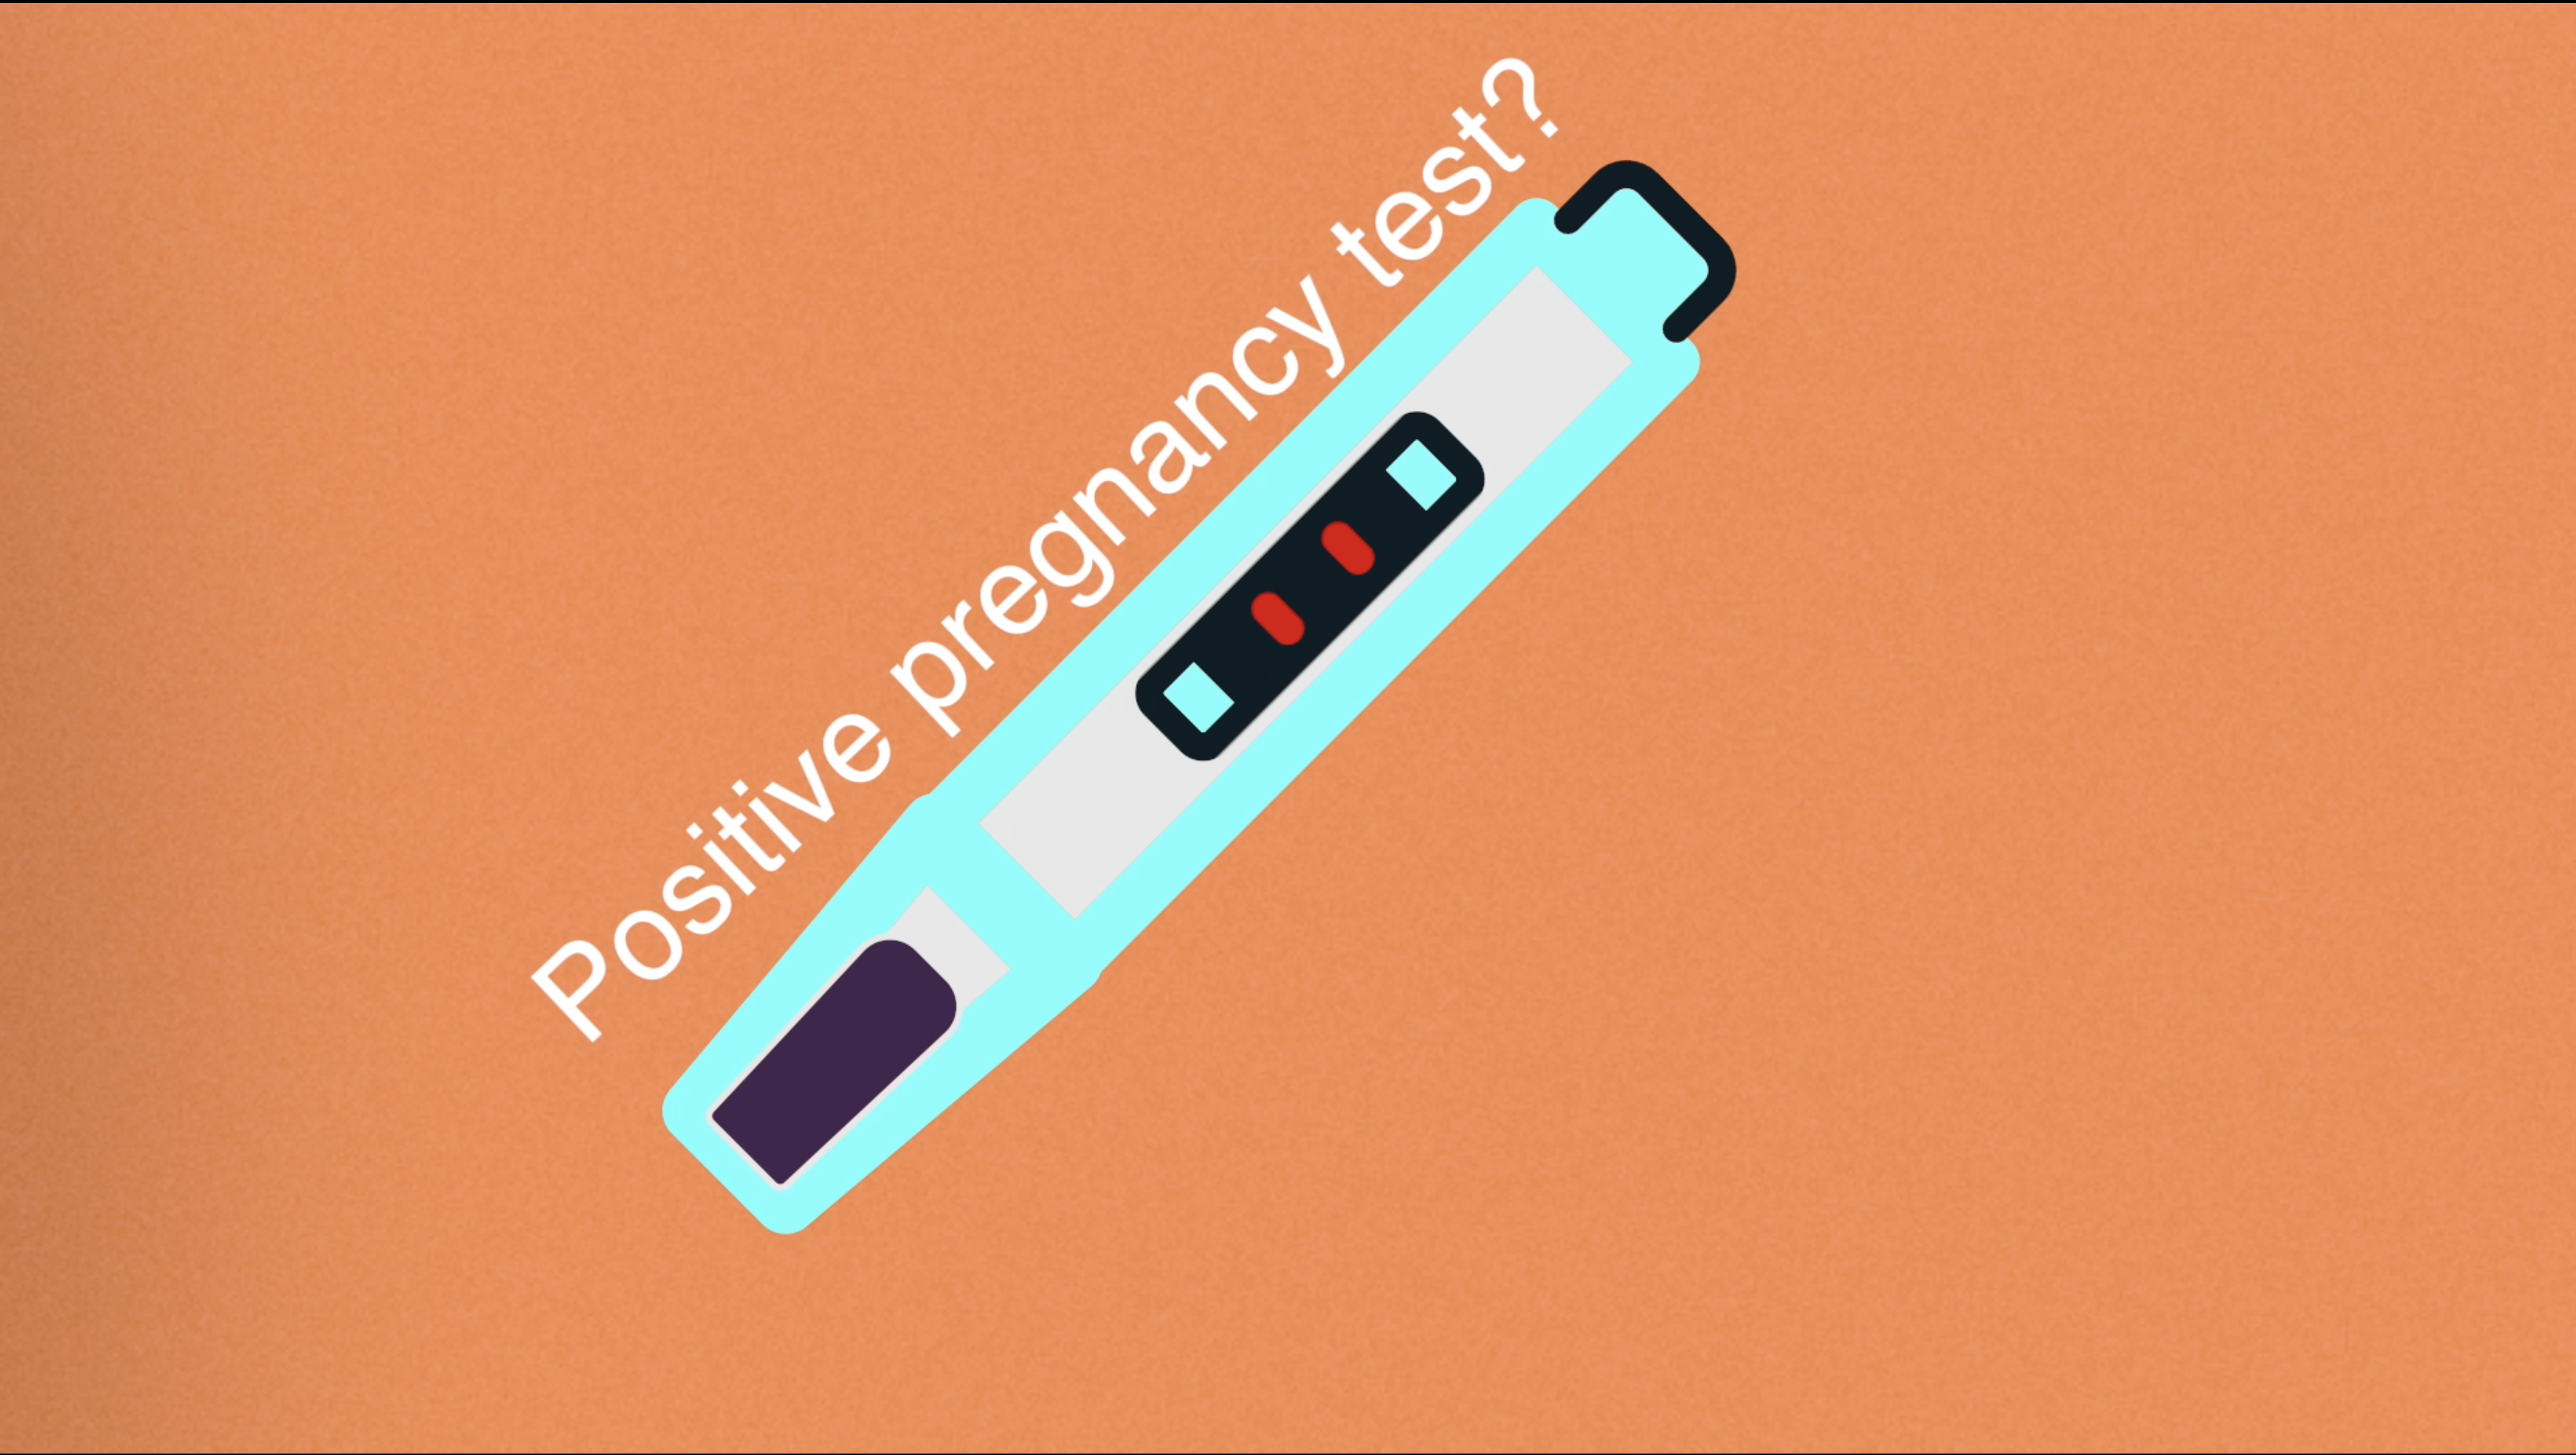 What Do I Do After a Positive Pregnancy Test?